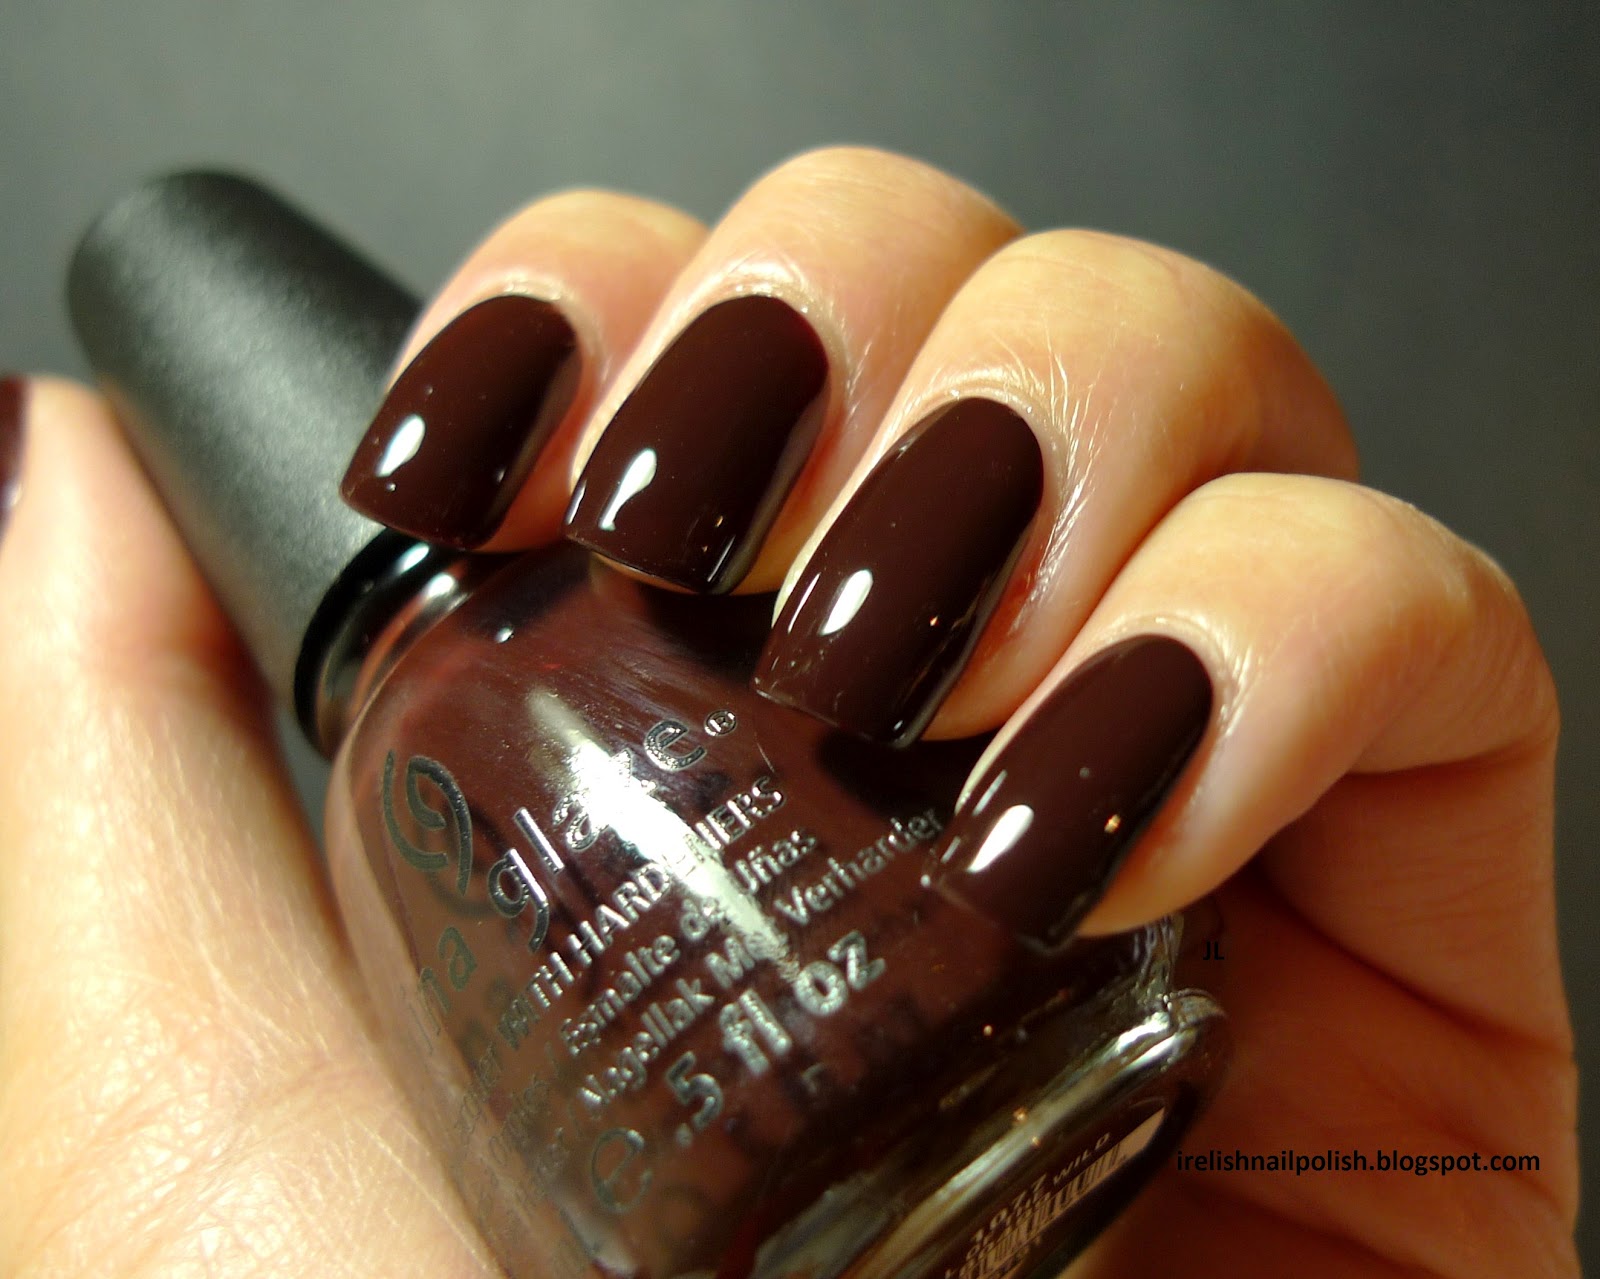 7. "Chocolate Brown" - wide 1